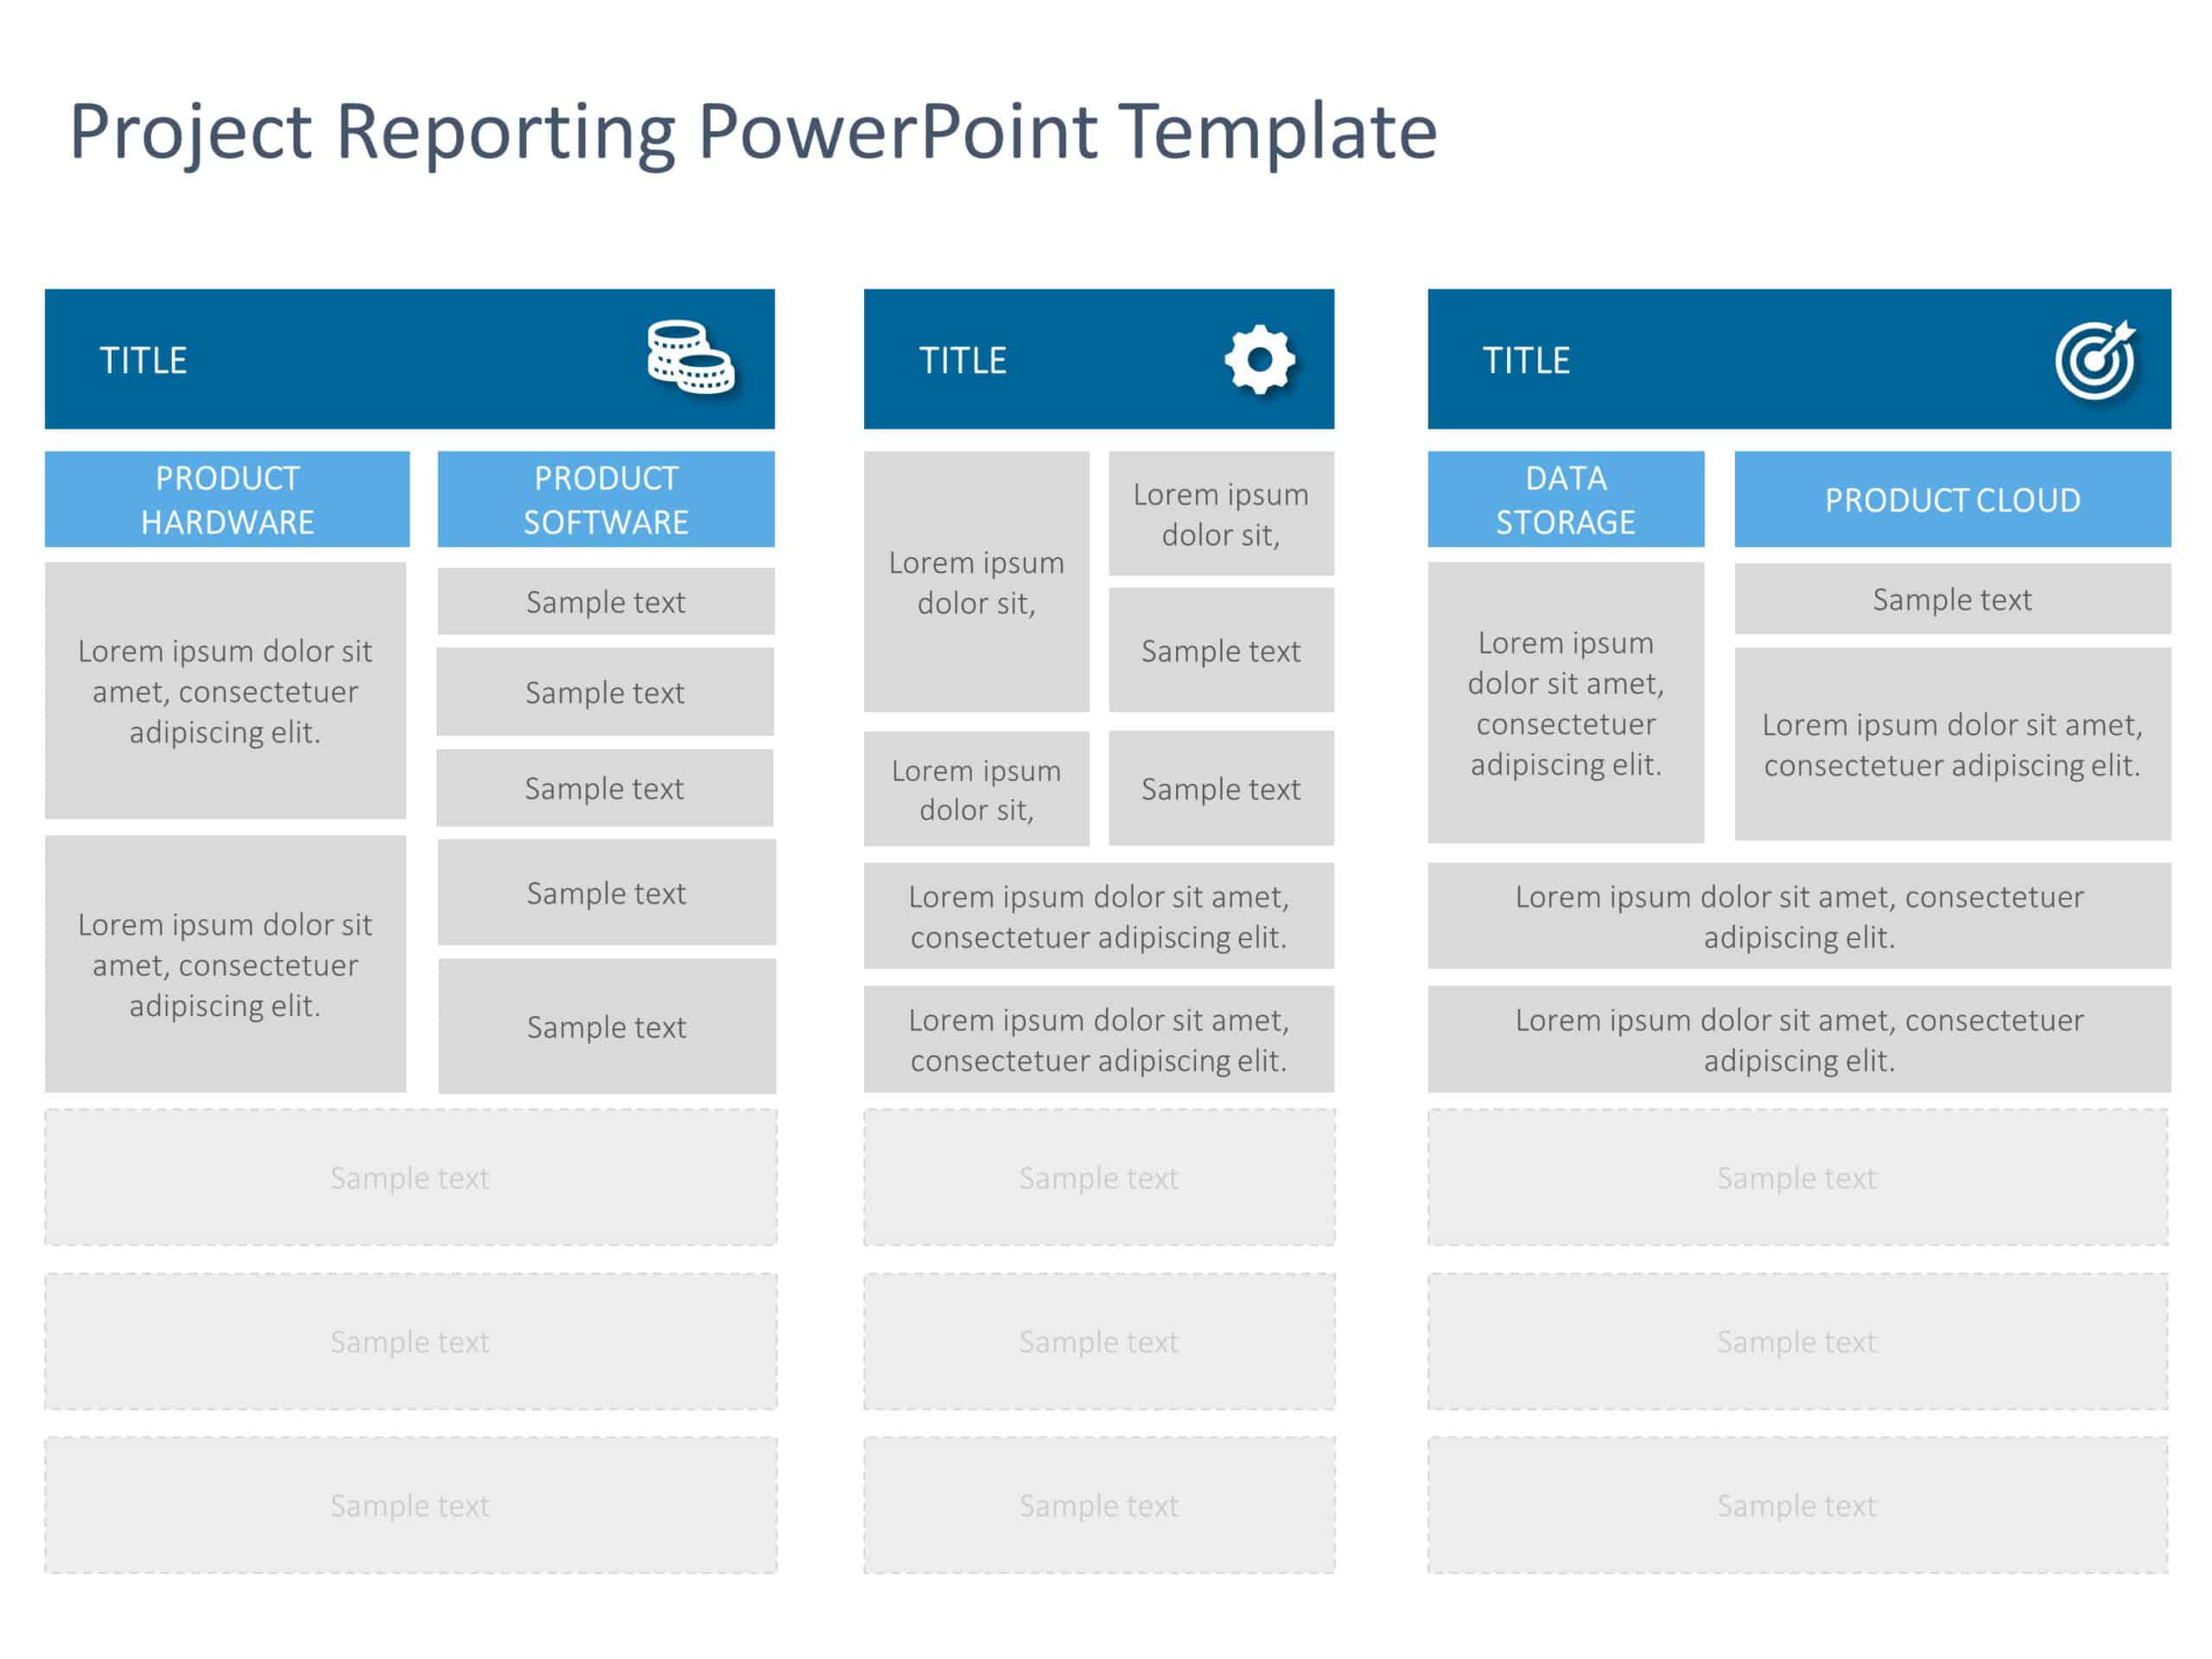 Project Reporting 1 PowerPoint Template